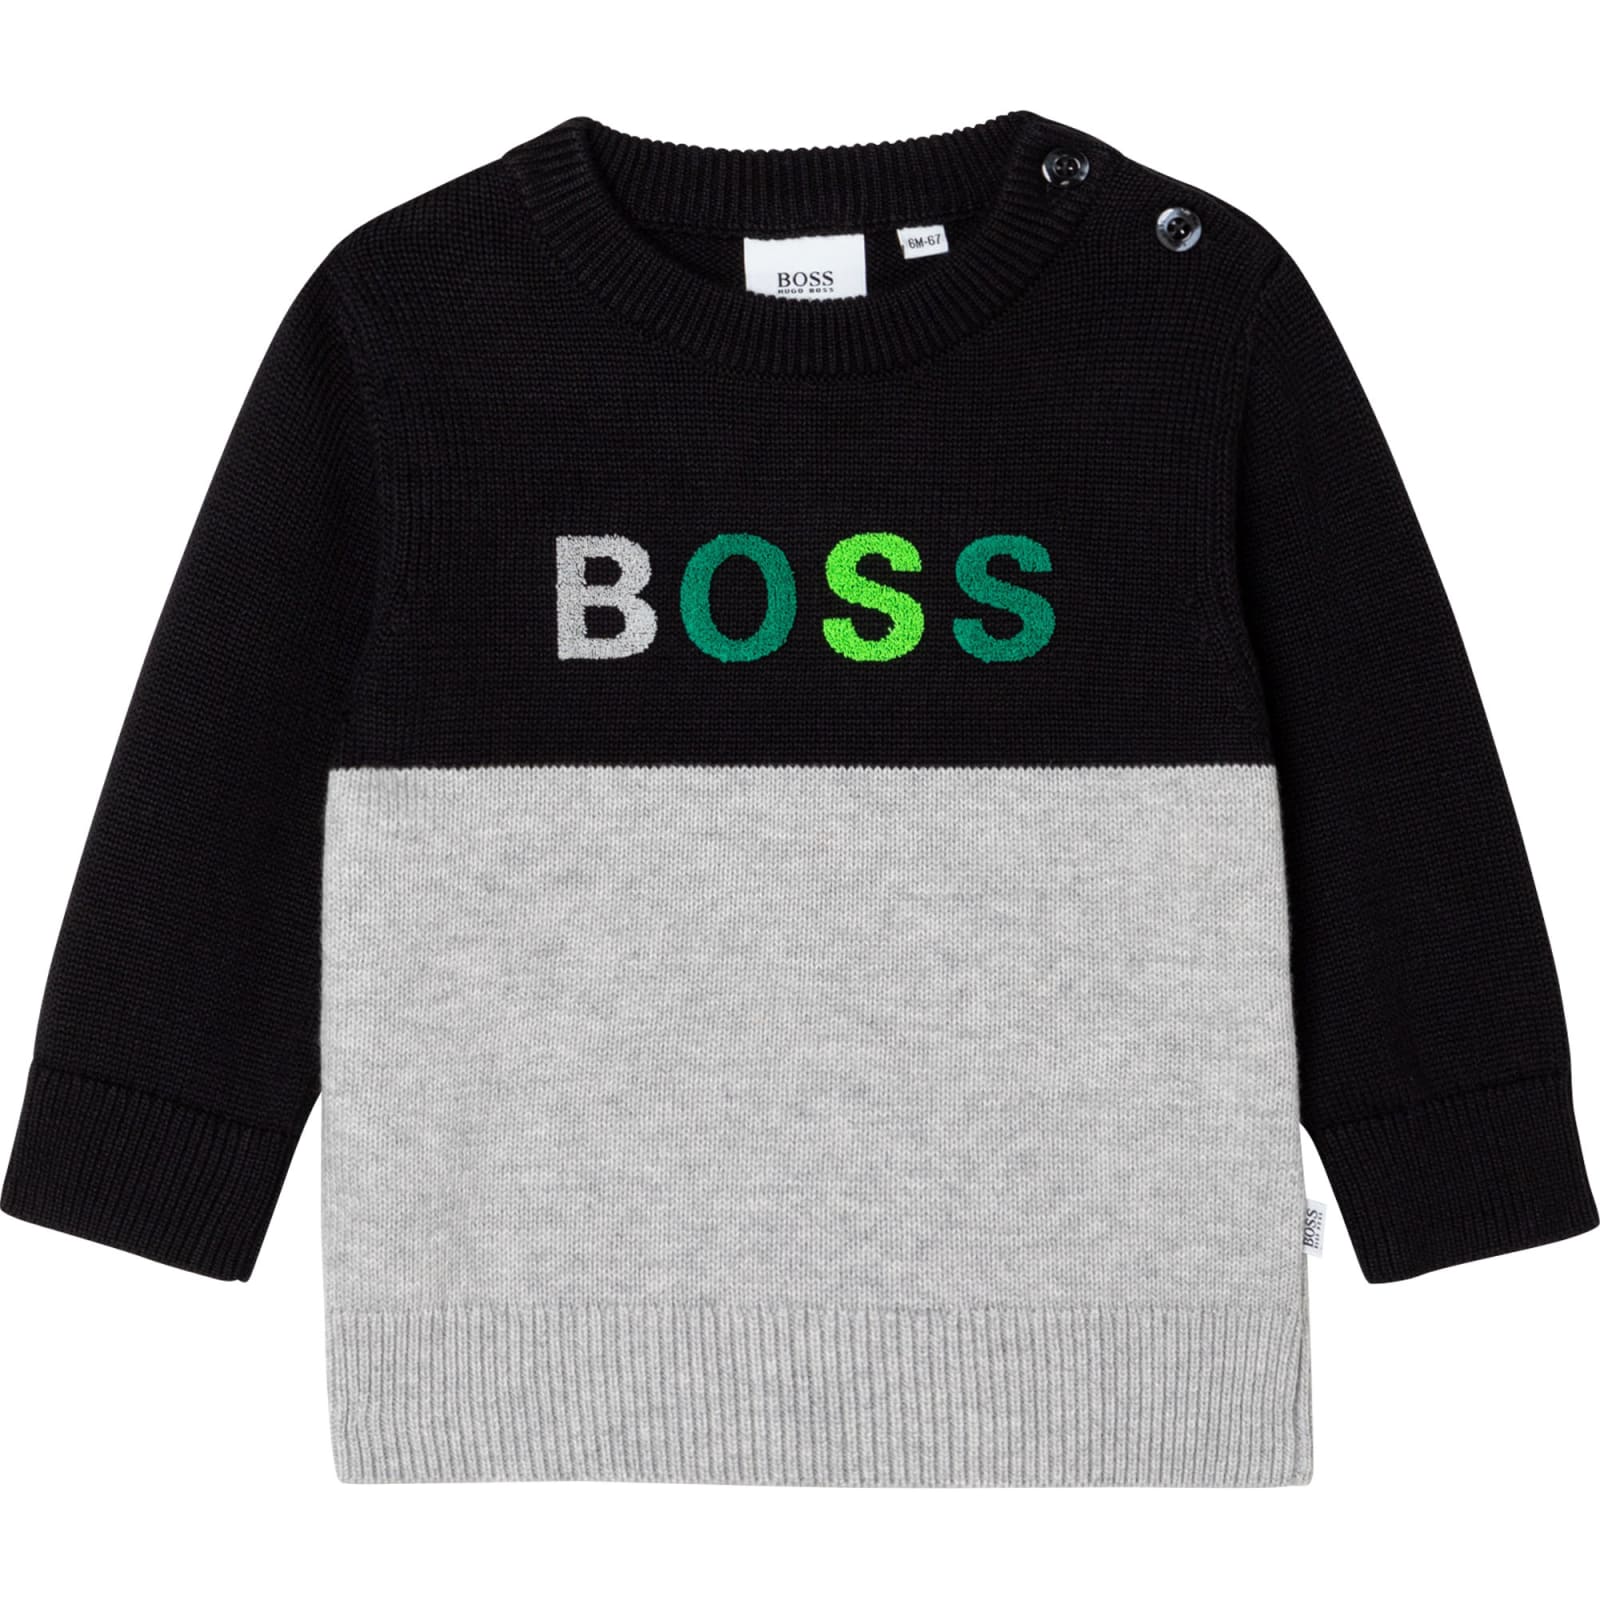 Hugo Boss Sweater With Embroidery